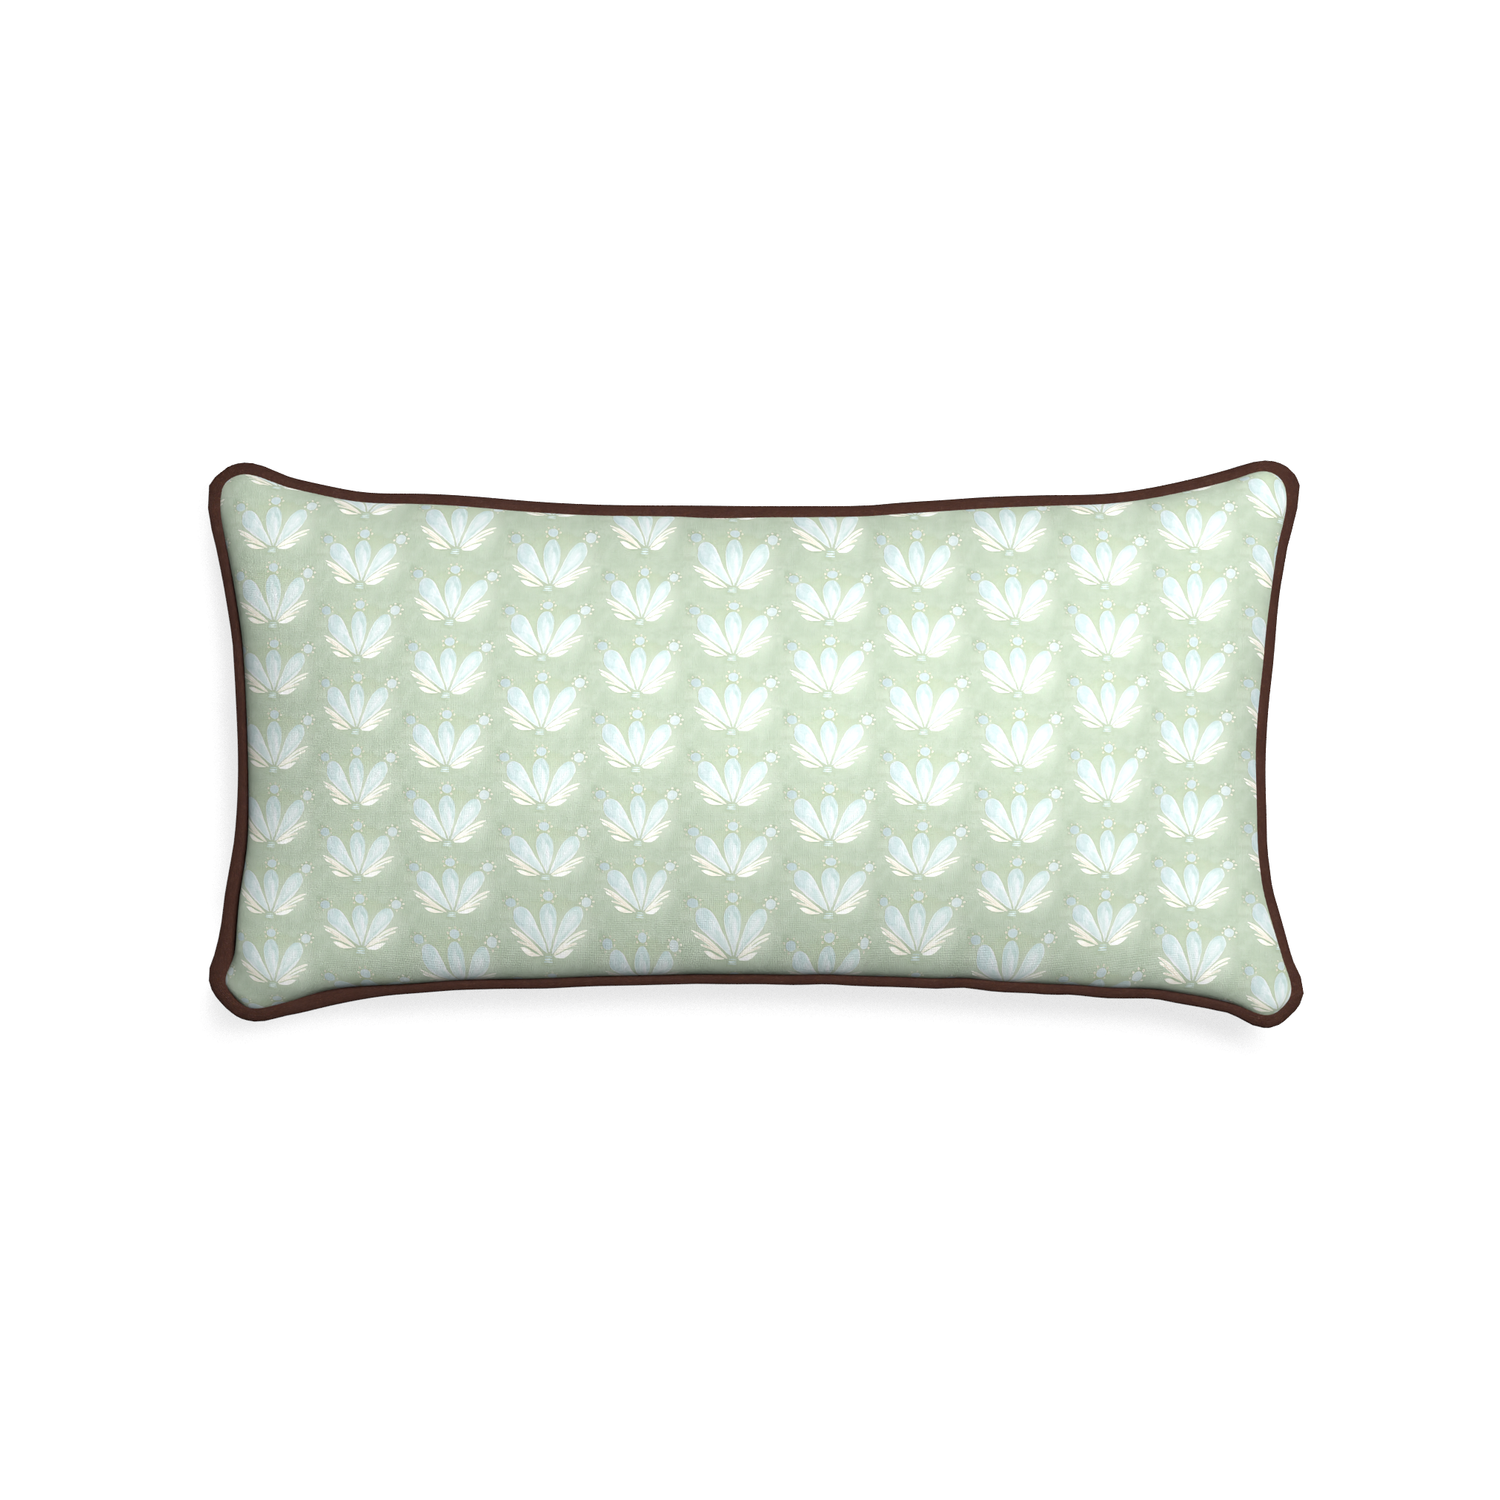 Midi-lumbar serena sea salt custom blue & green floral drop repeatpillow with w piping on white background